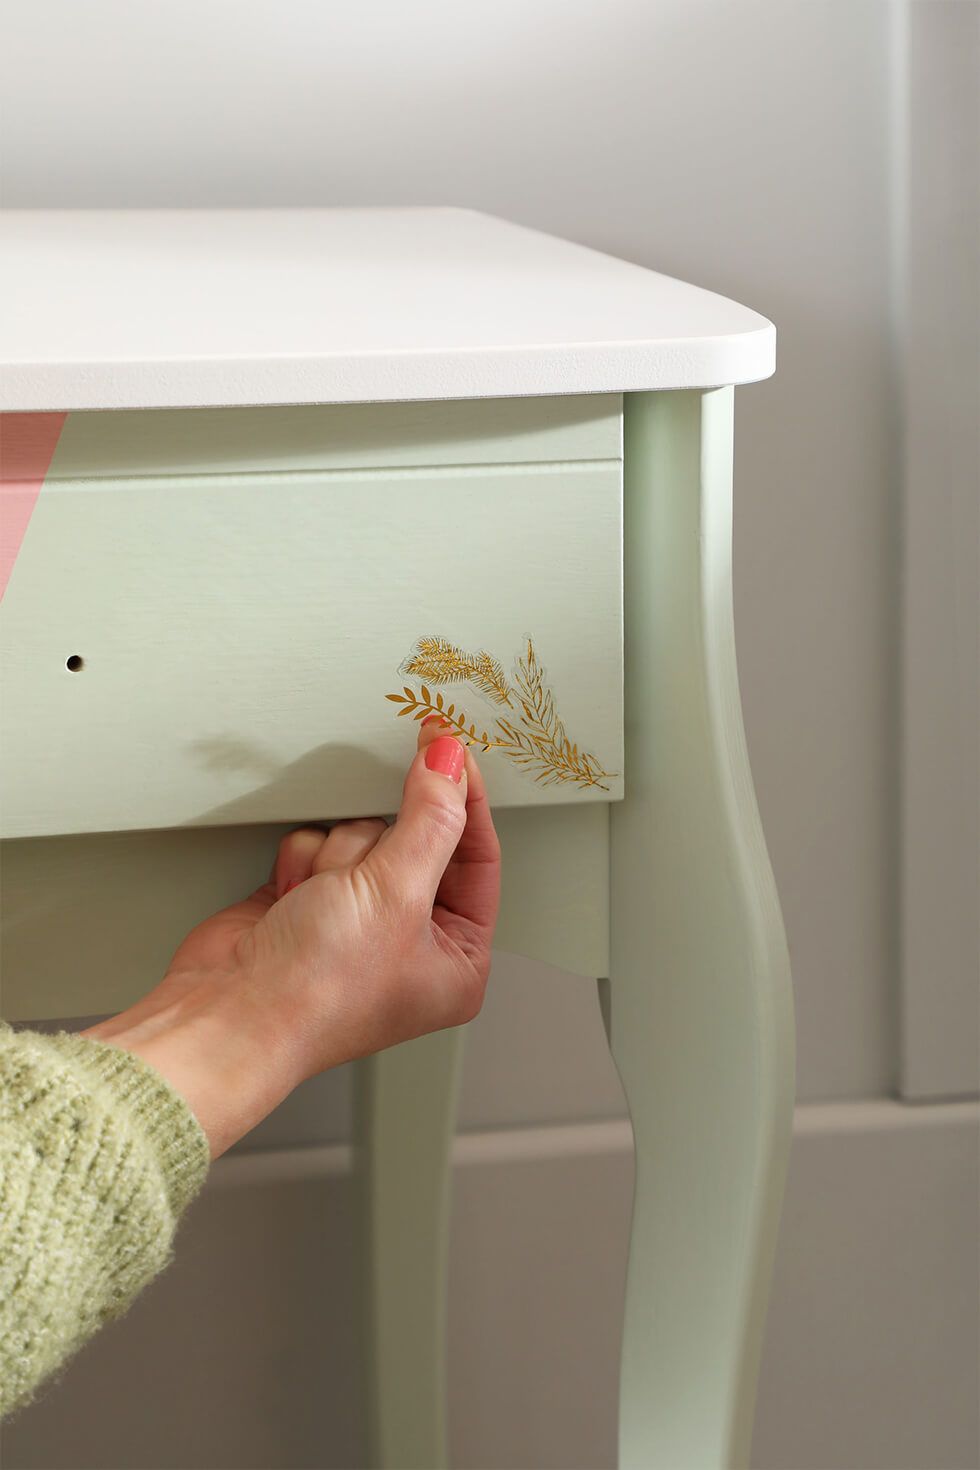 Add gold decal stickers to the drawer